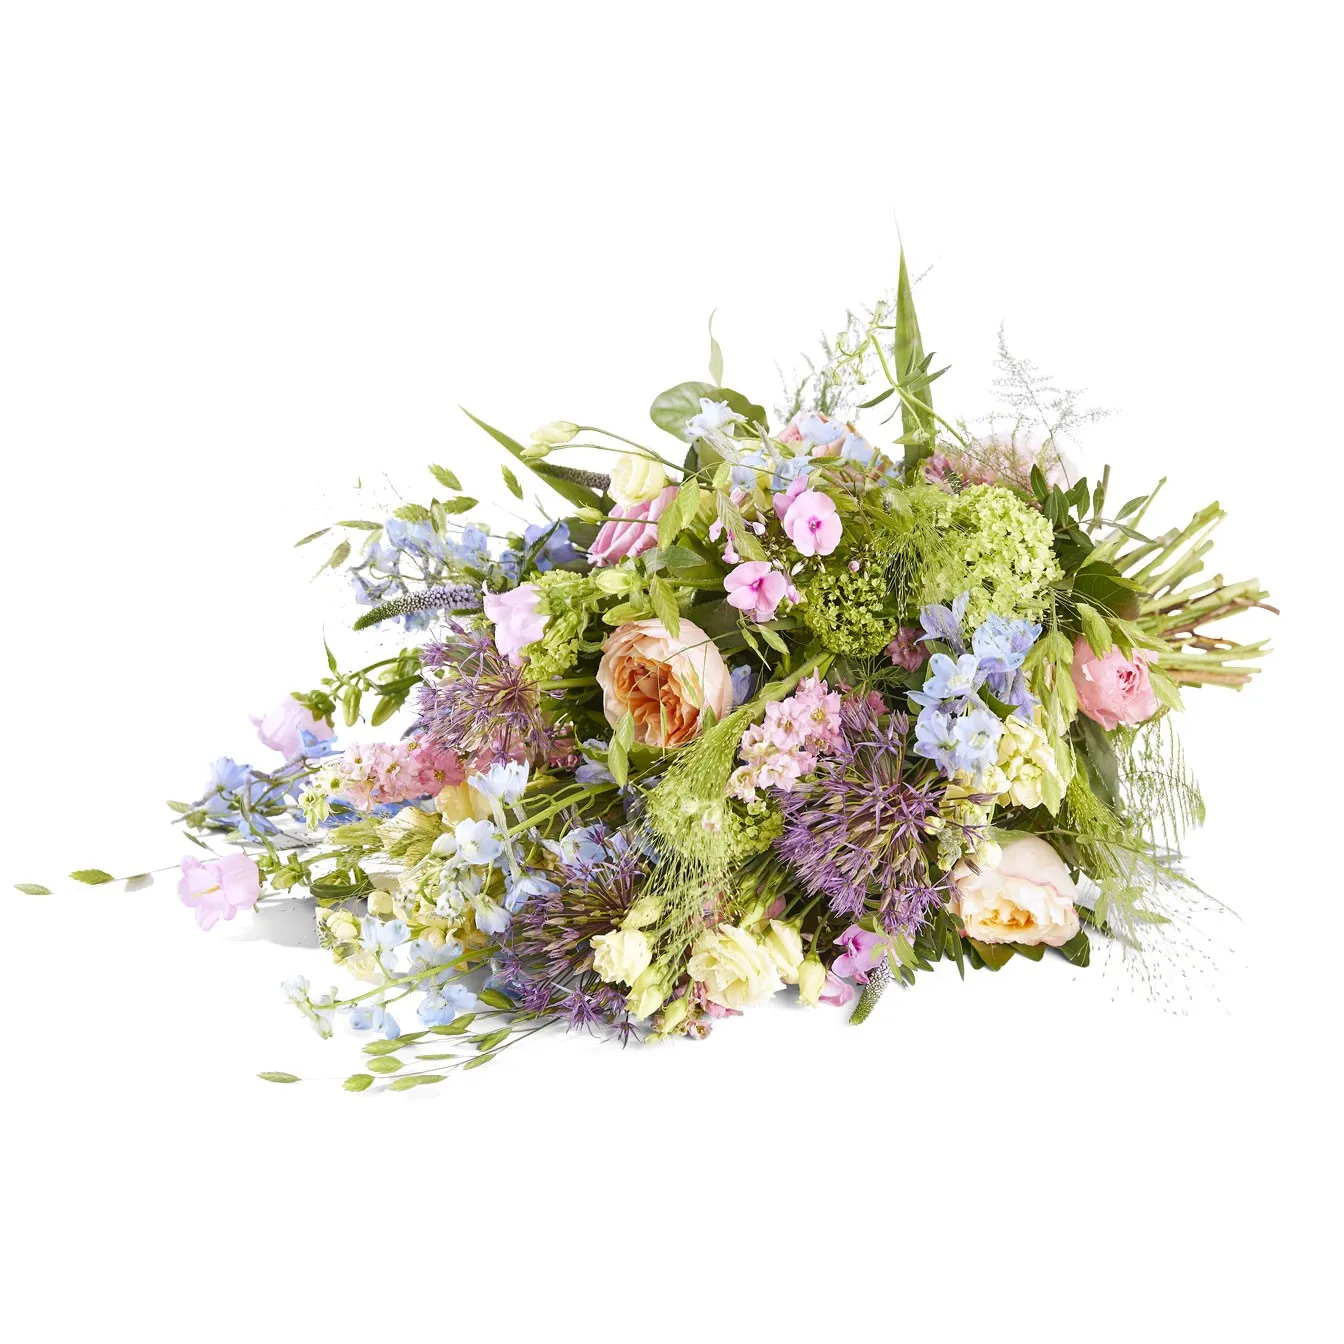 Funeral Bouquet - Fully in life